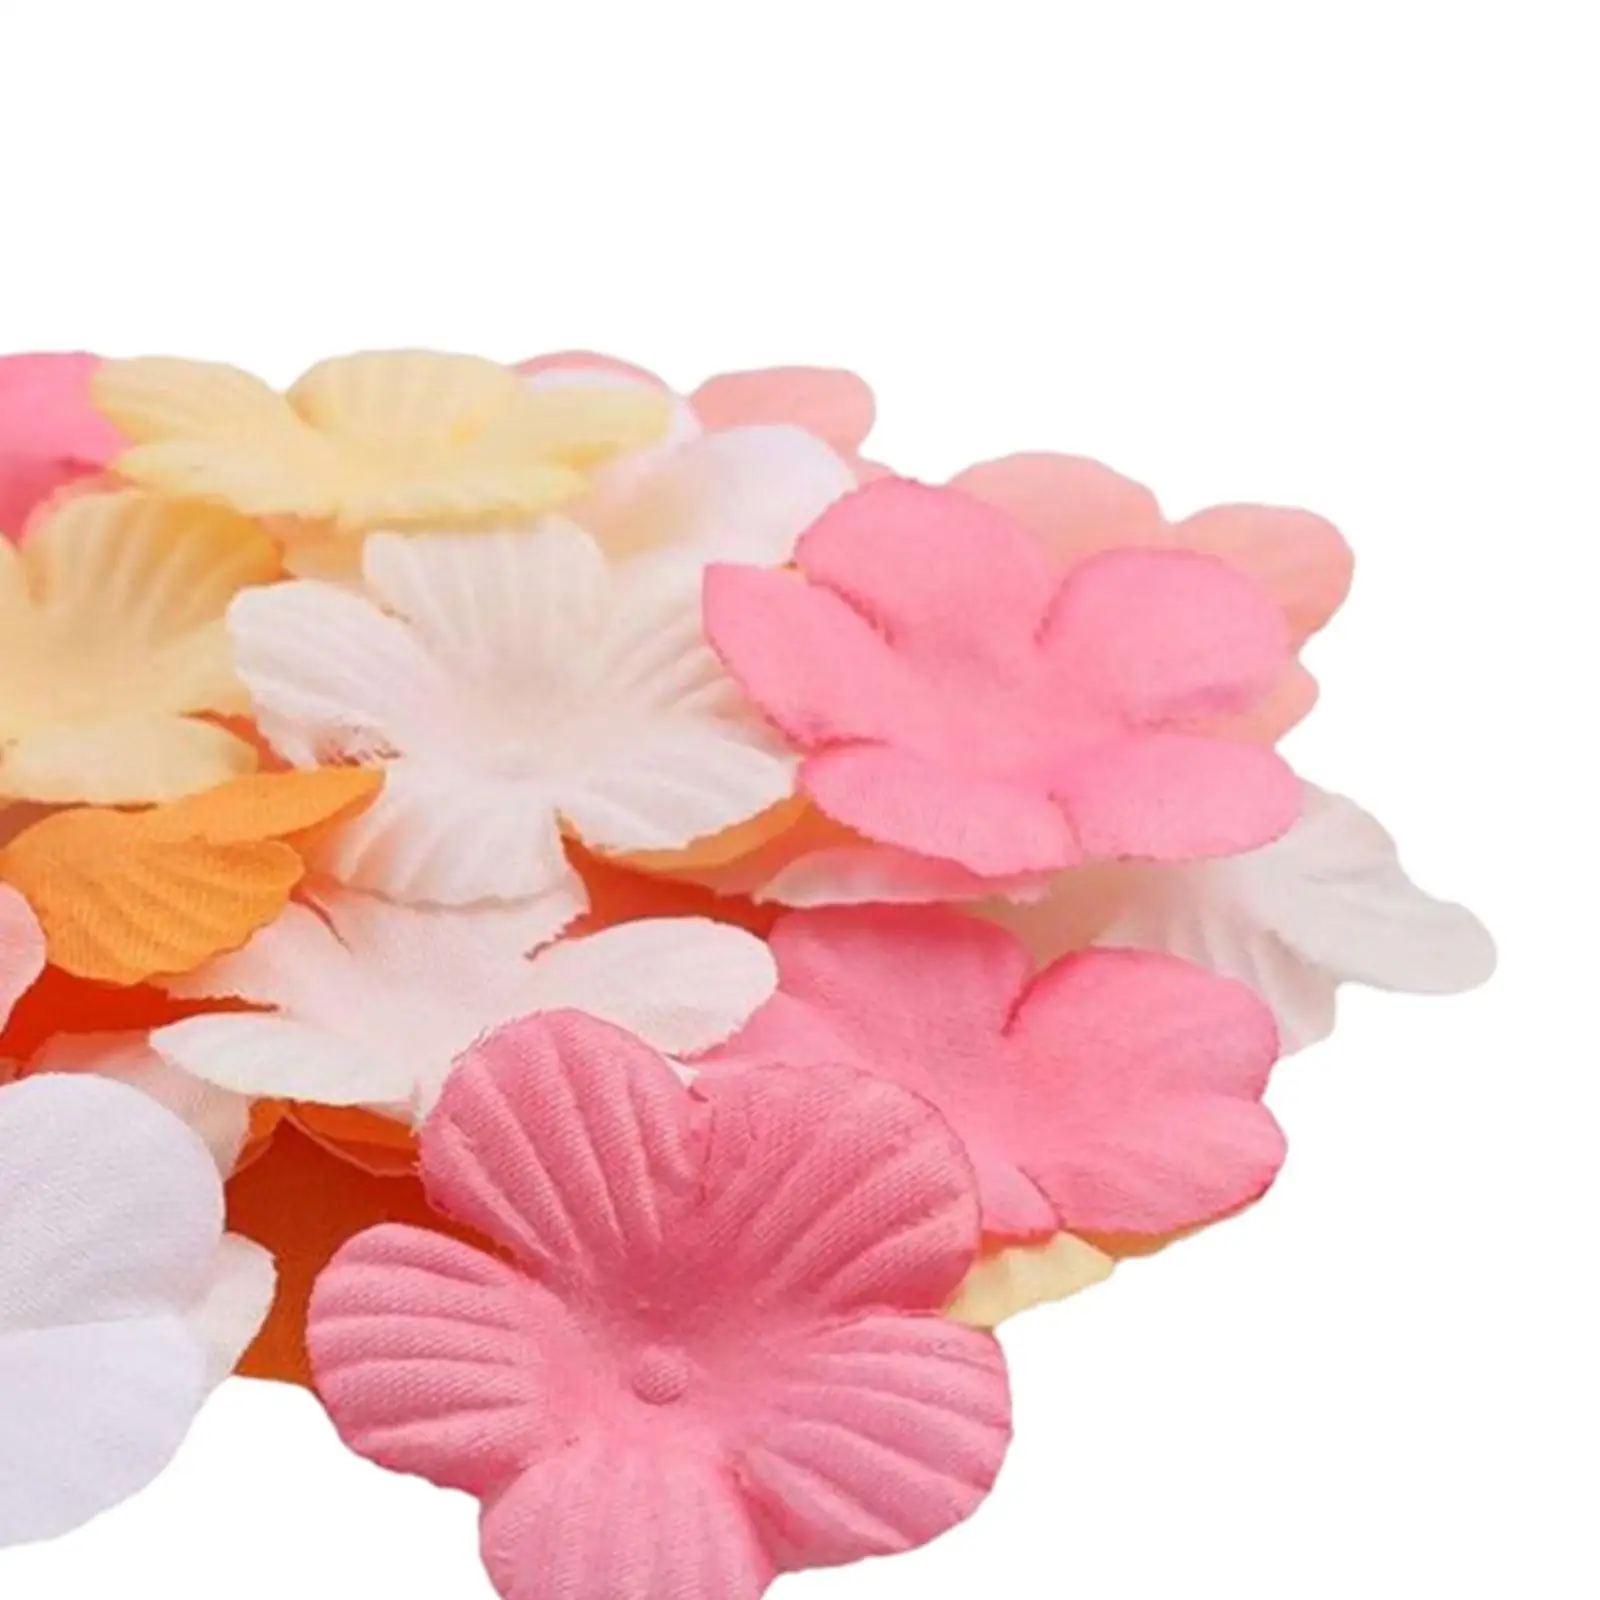 Cherry Blossom Petals 3cm 500 Pieces Plum Blossom Fake Flower Petals for Wreath Garden Indoor Outdoor Party Decorations Table